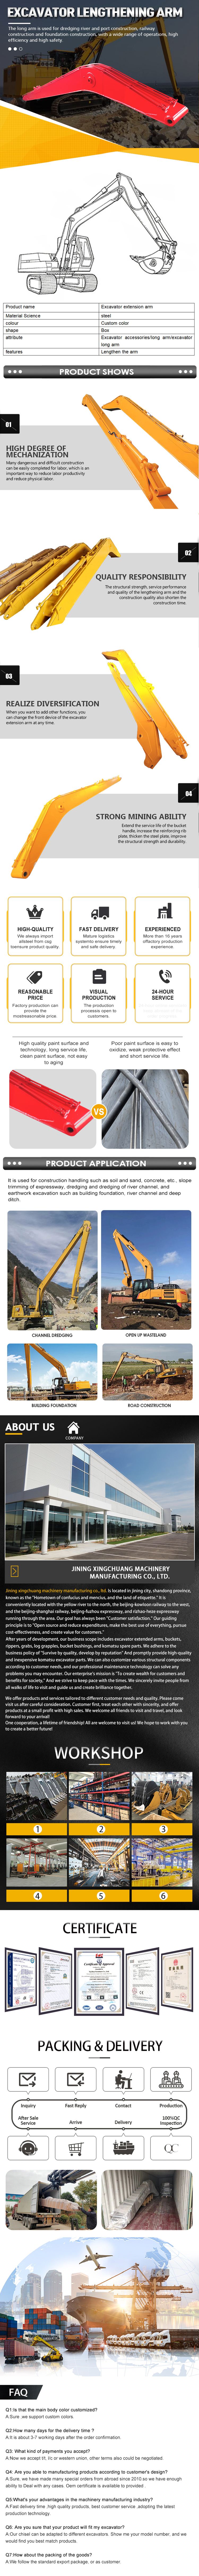 Komatsu 460 excavator with a long arm of 20 meters, 22 meters, and 26 meters, customized by the manufacturer